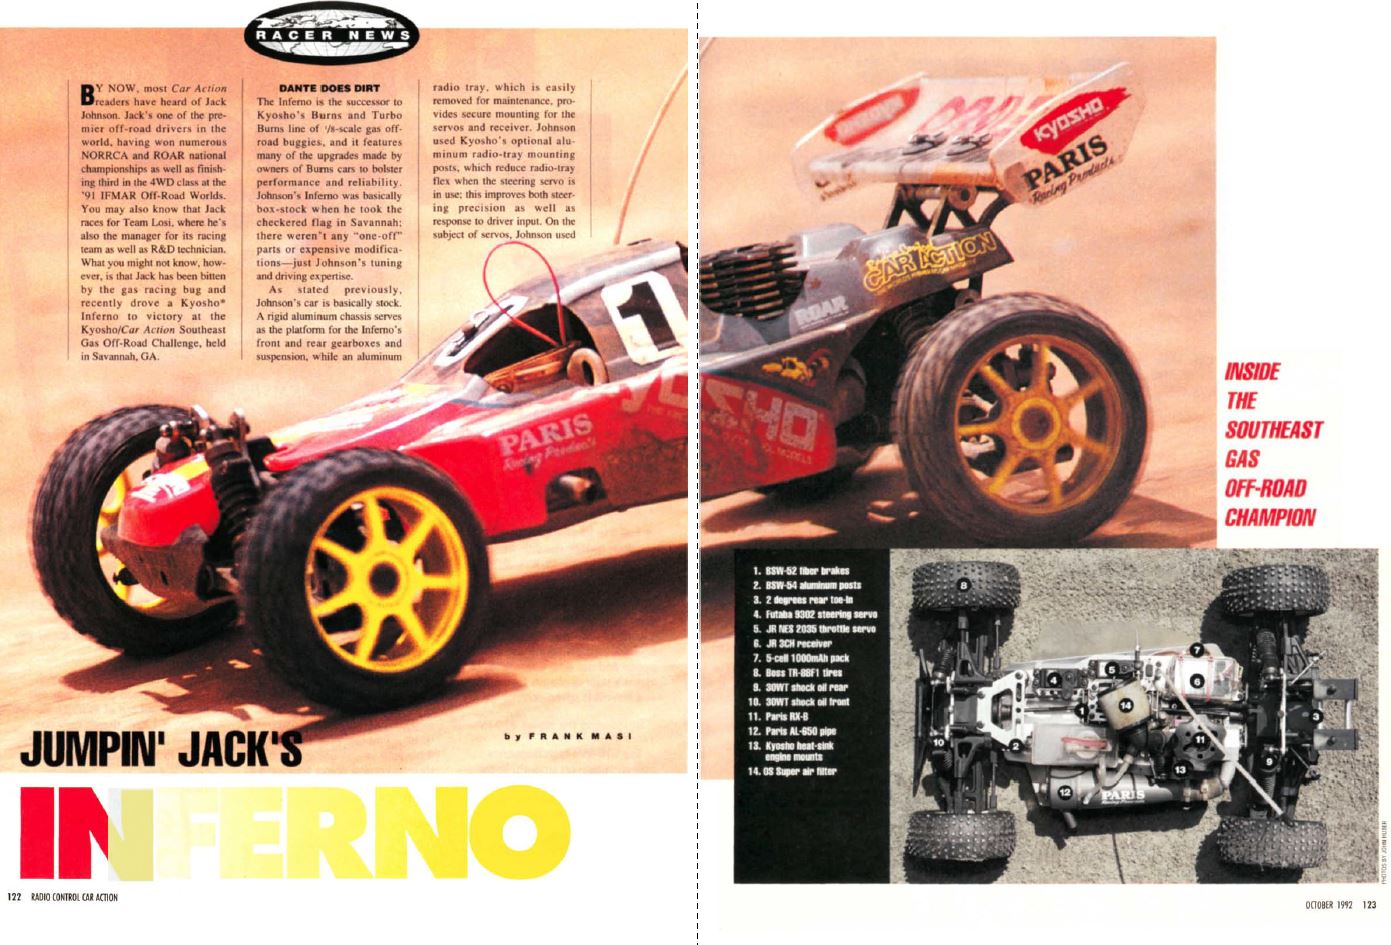 #TBT "Under the Hood" with Jack Johnson's winning Kyosho Inferno Featured in October 1992 Issue